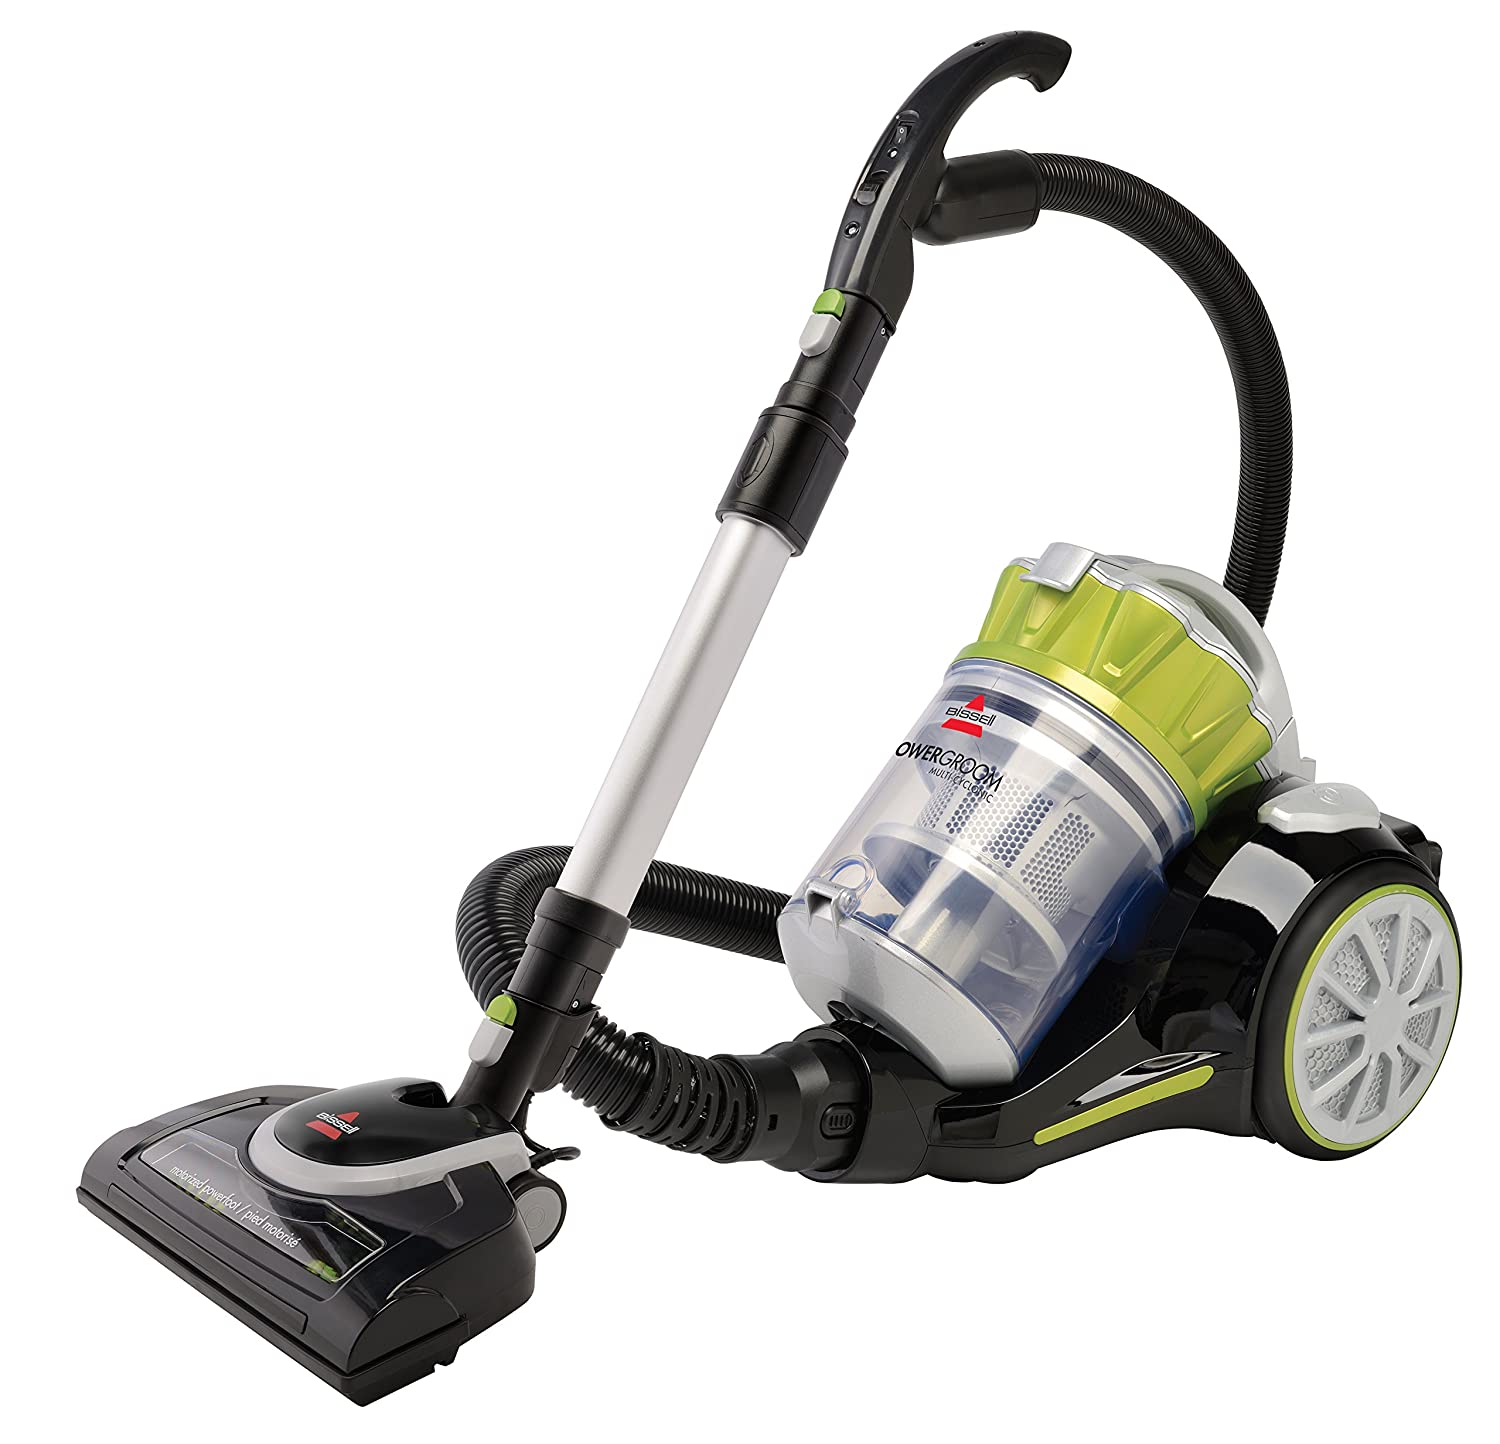 Bissell Powergroom Multicyclonic Bagless Canister Vacuum